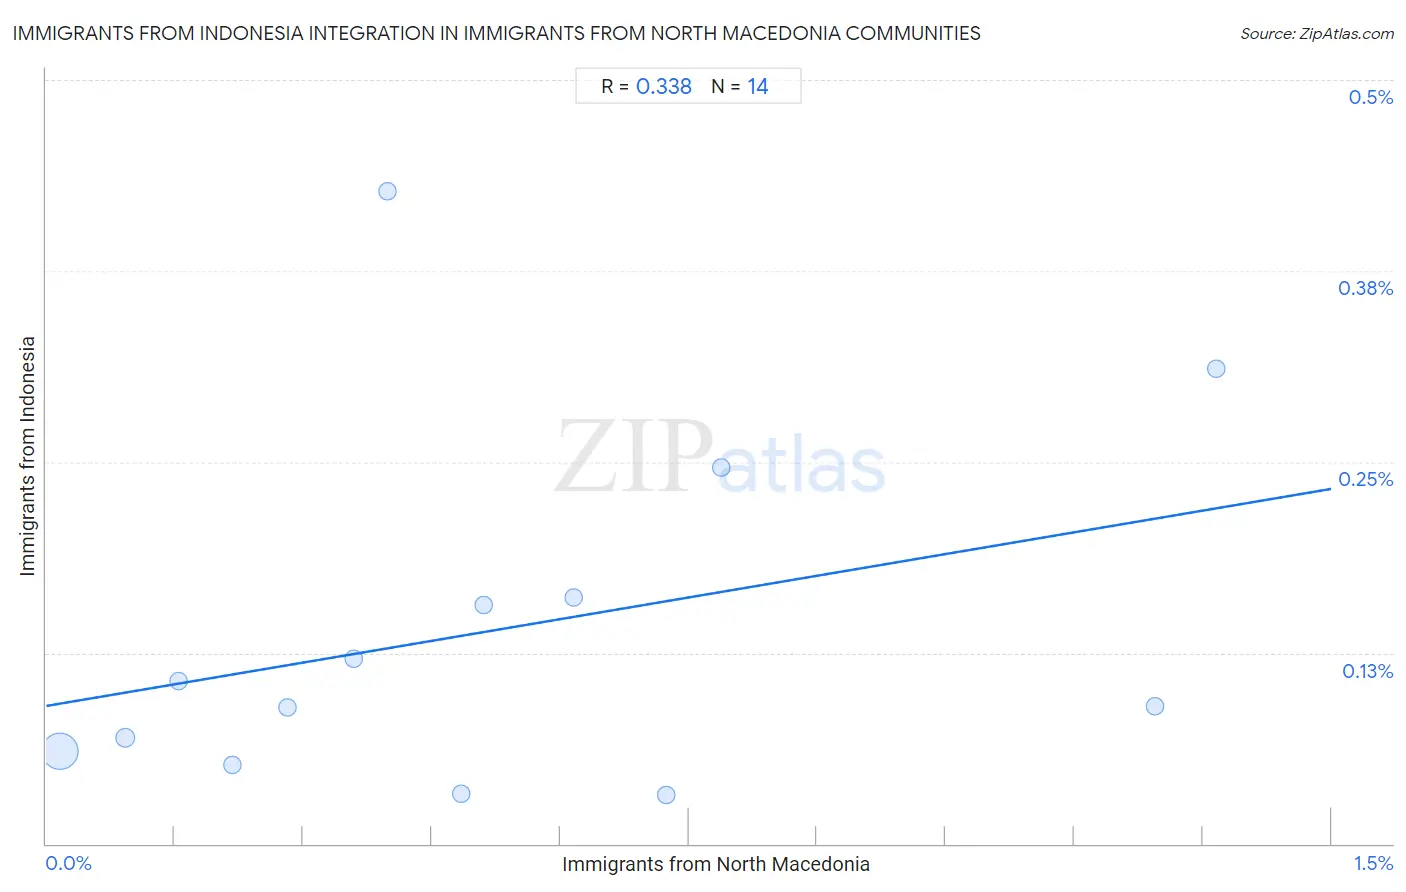 Immigrants from North Macedonia Integration in Immigrants from Indonesia Communities